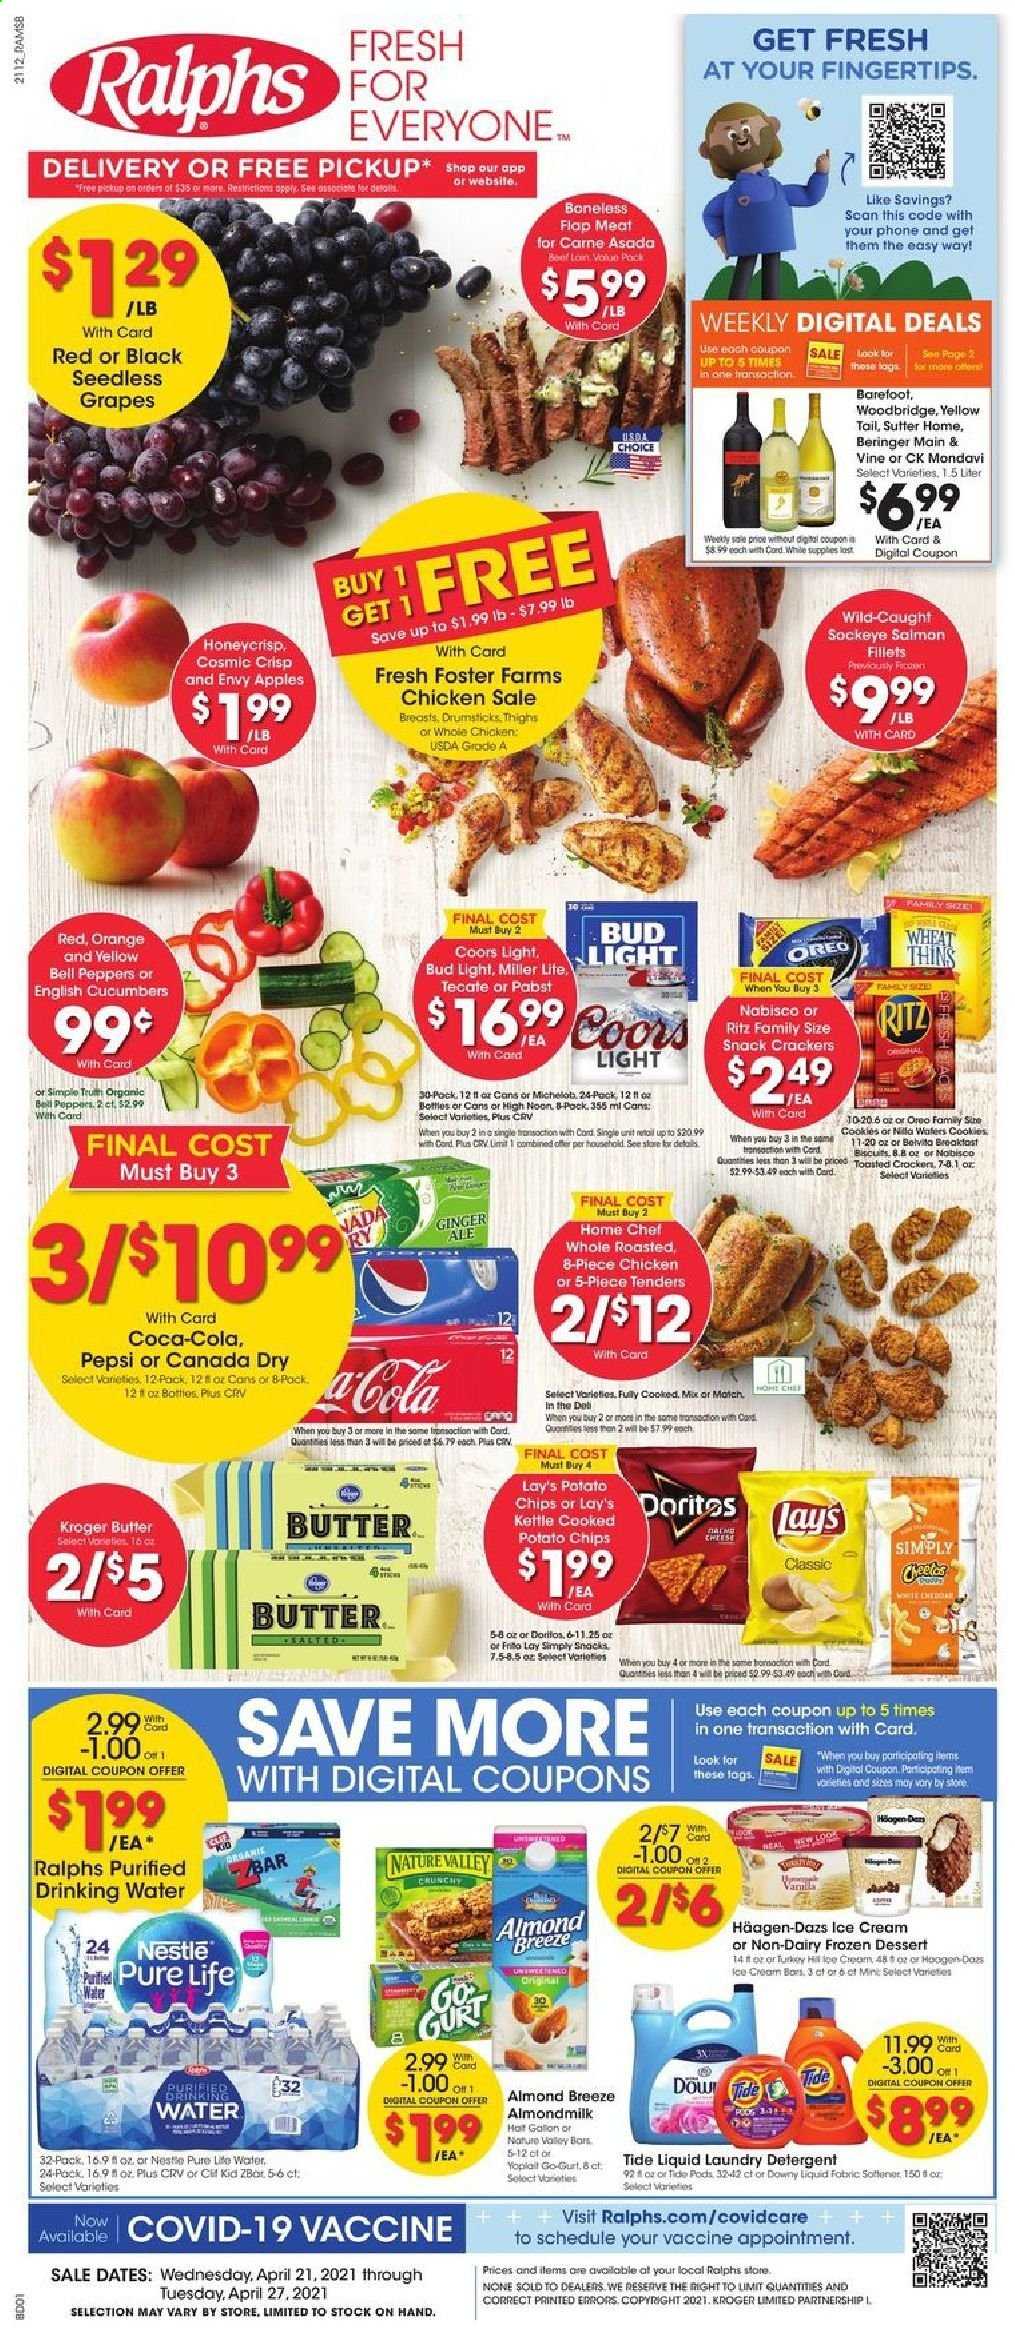 thumbnail - Ralphs Flyer - 04/21/2021 - 04/27/2021 - Sales products - seedless grapes, bell peppers, cucumber, peppers, apples, grapes, oranges, Oreo, Yoplait, almond milk, Almond Breeze, butter, Häagen-Dazs, cookies, Nestlé, snack, crackers, biscuit, RITZ, Doritos, potato chips, Lay’s, Thins, belVita, Nature Valley, Canada Dry, Coca-Cola, ginger ale, Pepsi, Pure Life Water, Woodbridge, beer, Miller Lite, Coors, Michelob, Bud Light, whole chicken, detergent, Tide, laundry detergent, Downy Laundry. Page 1.